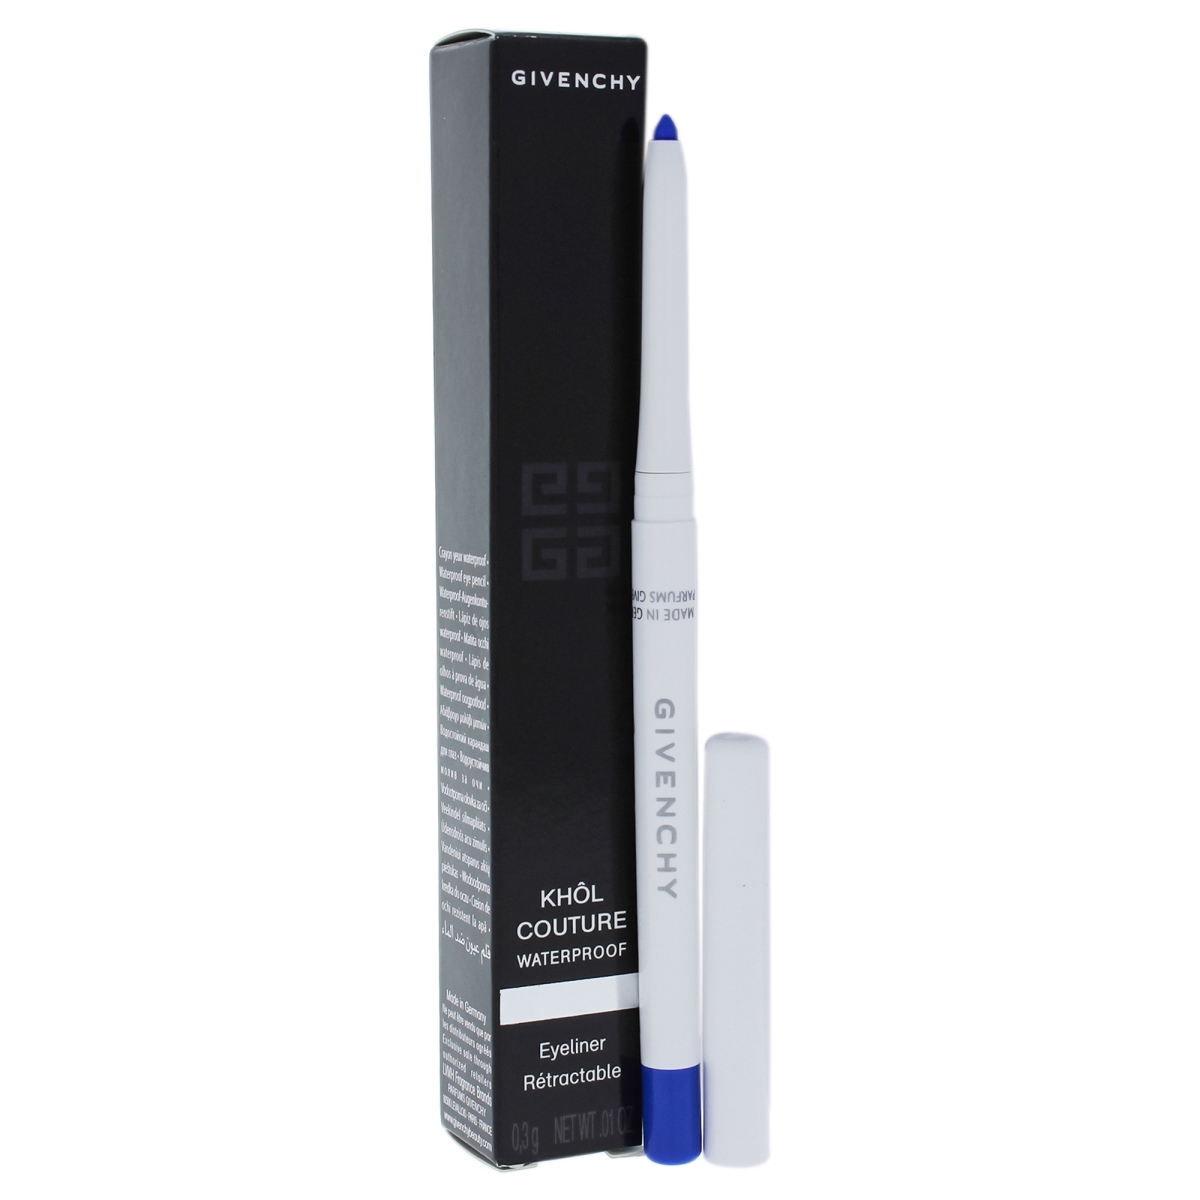 Picture of Givenchy I0083159 Khol Couture Waterproof Retractable Eye Liner - 04 Cobalt - 0.01 oz